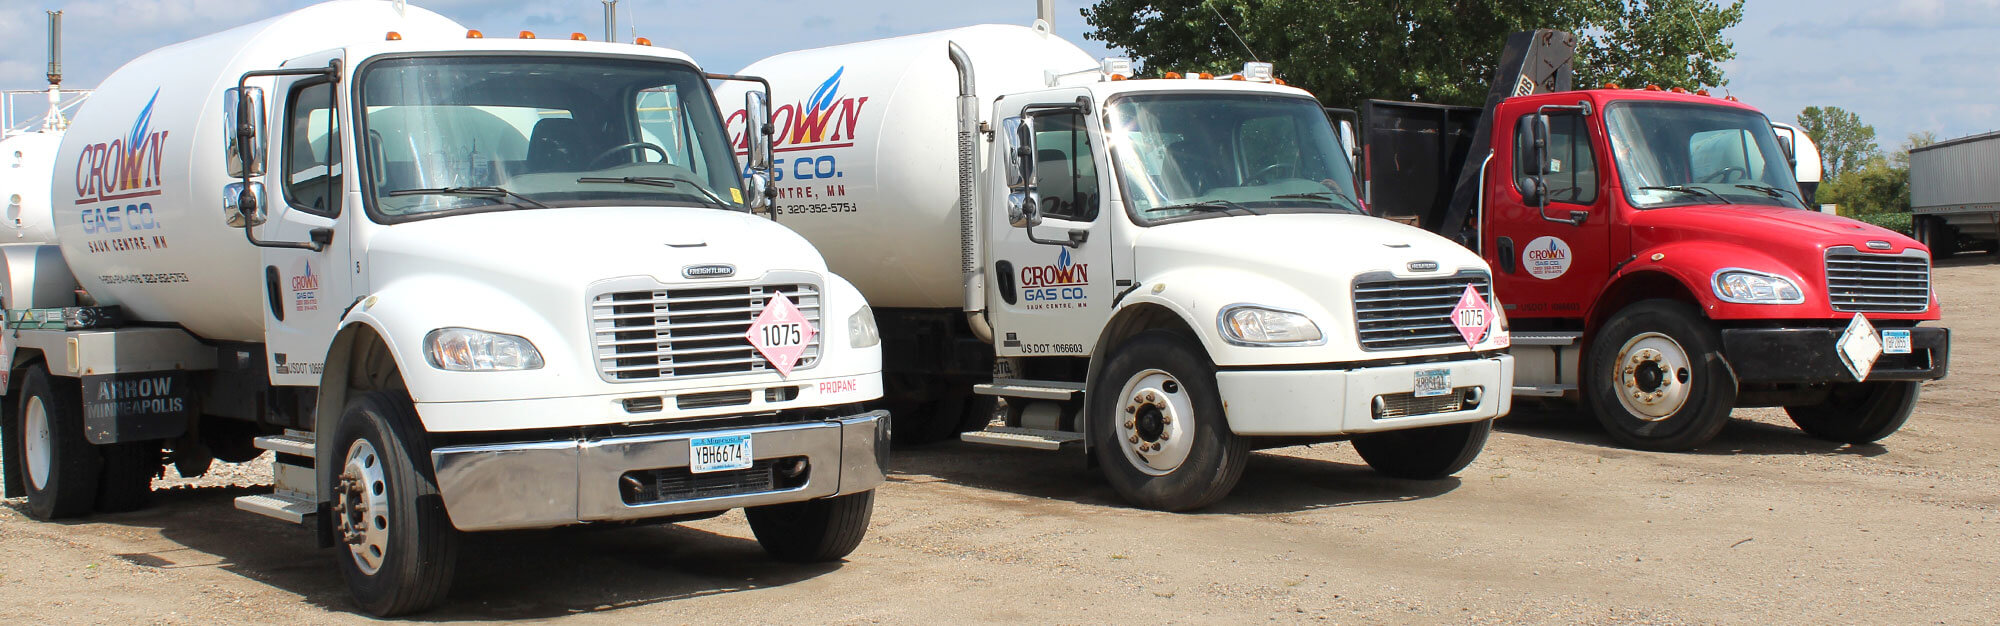 Row of Crown Gas propane delivery and service trucks